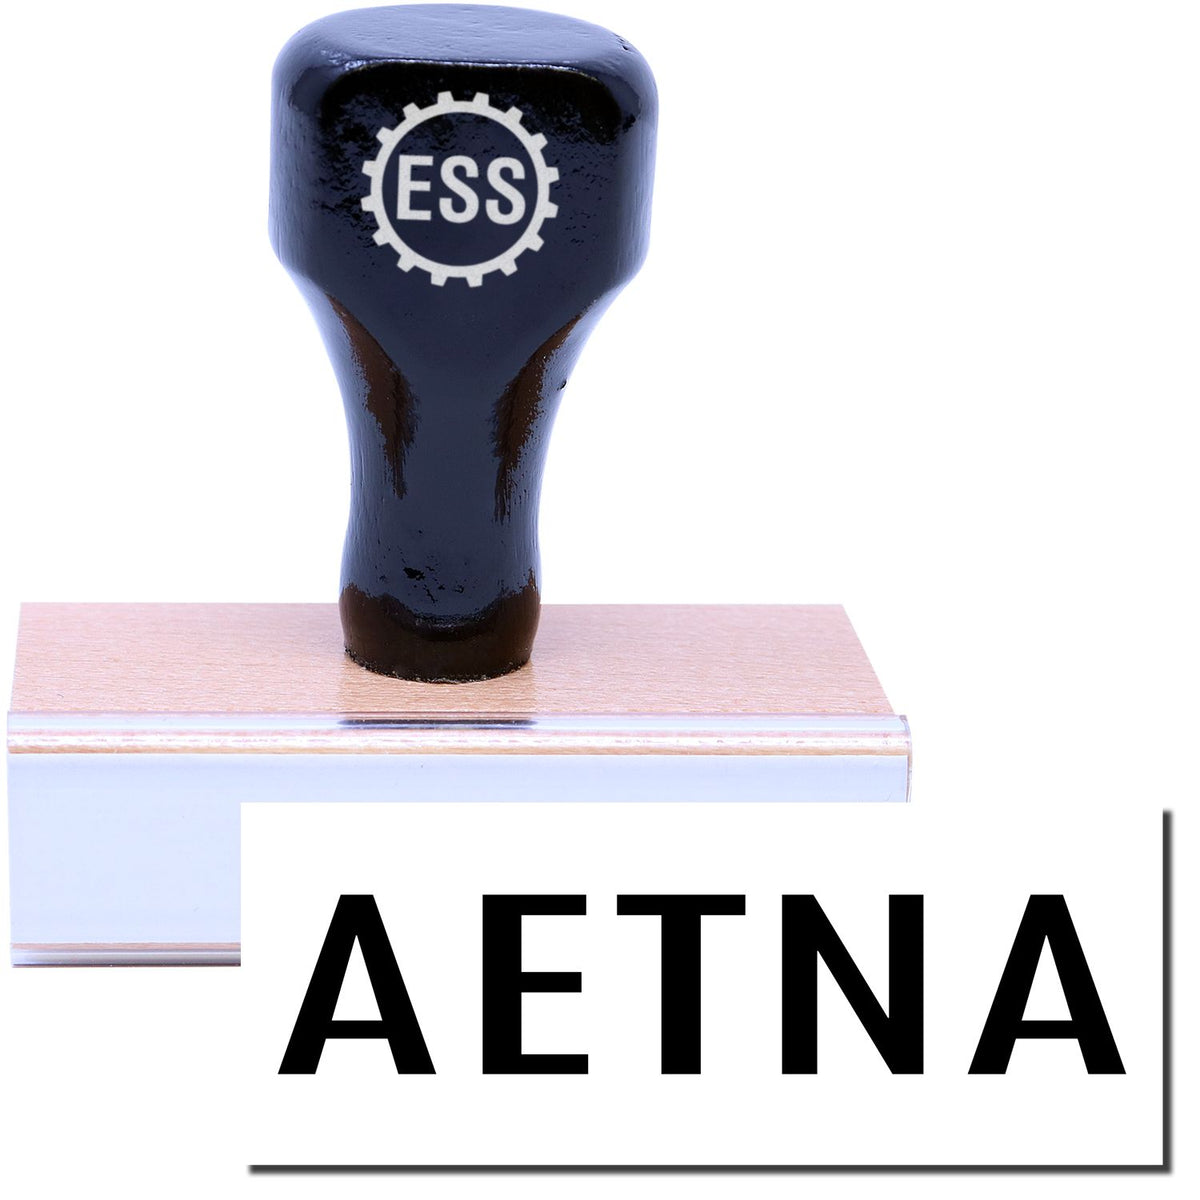 A stock office rubber stamp with a stamped image showing how the text &quot;AETNA&quot; in a large font is displayed after stamping.